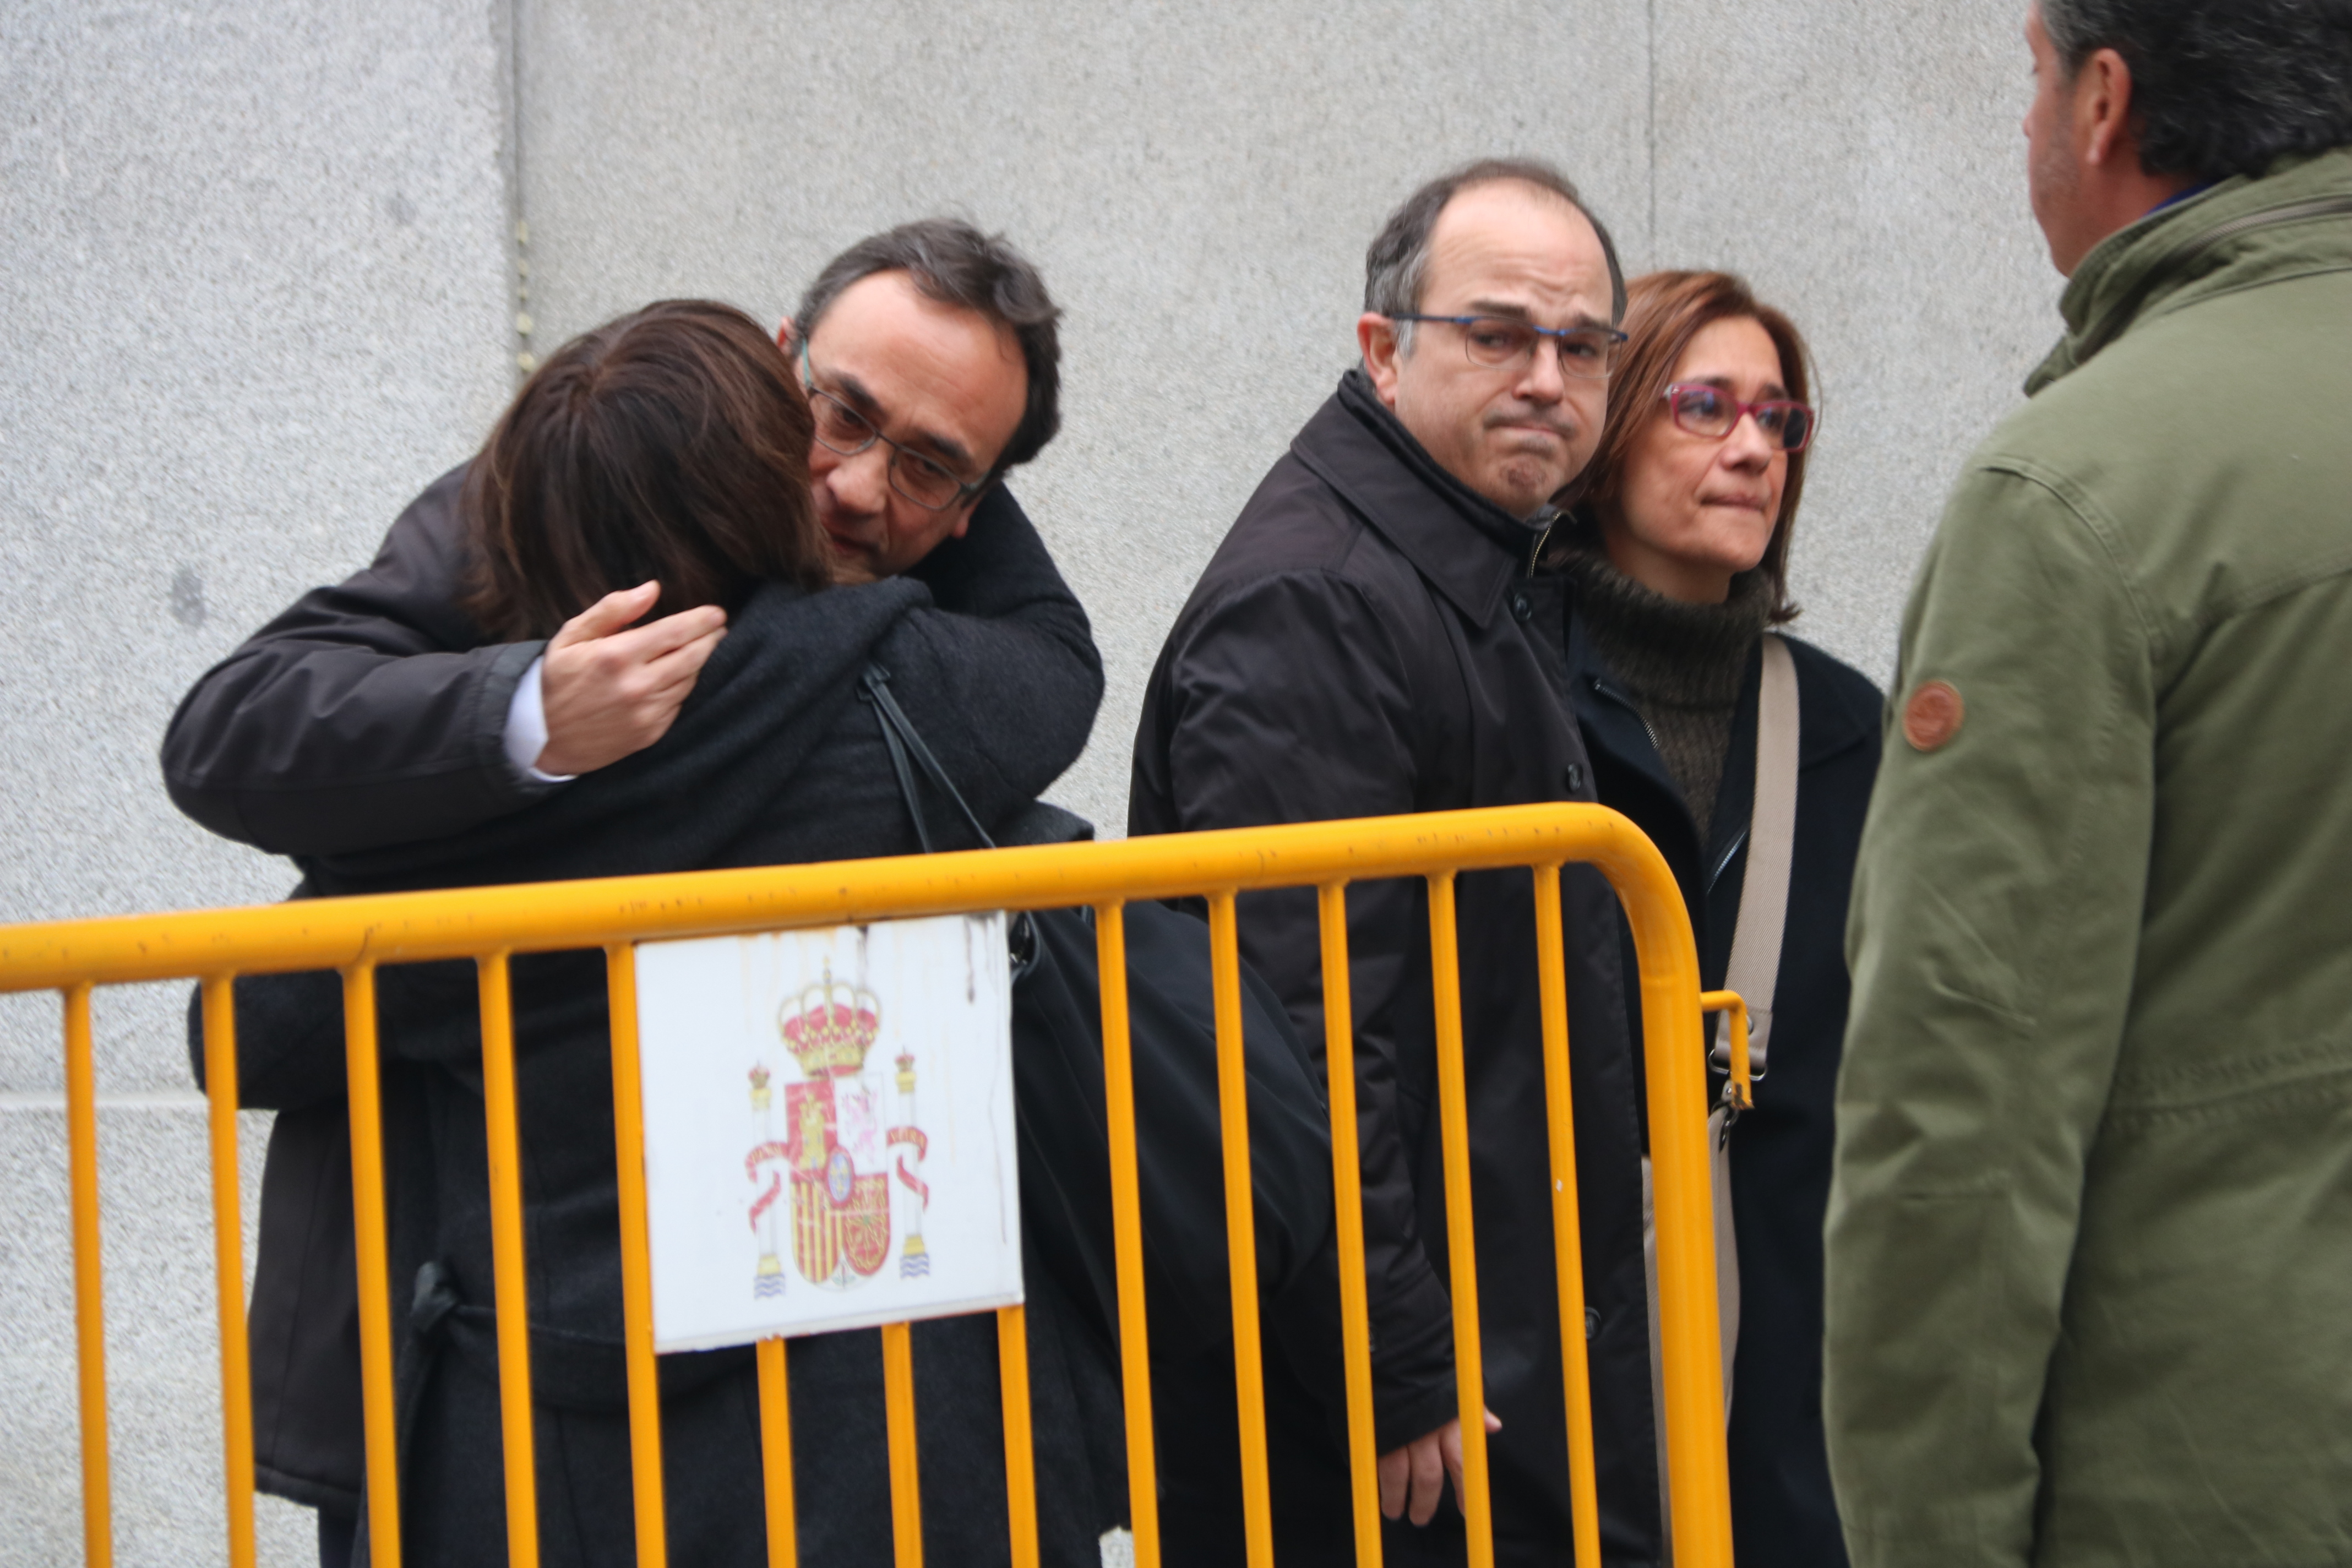 MPs Josep Rull (left) and Jordi Turull (right) with their spouses before the Supreme Court hearing on March 23 2018 (by Xavier Alsinet)